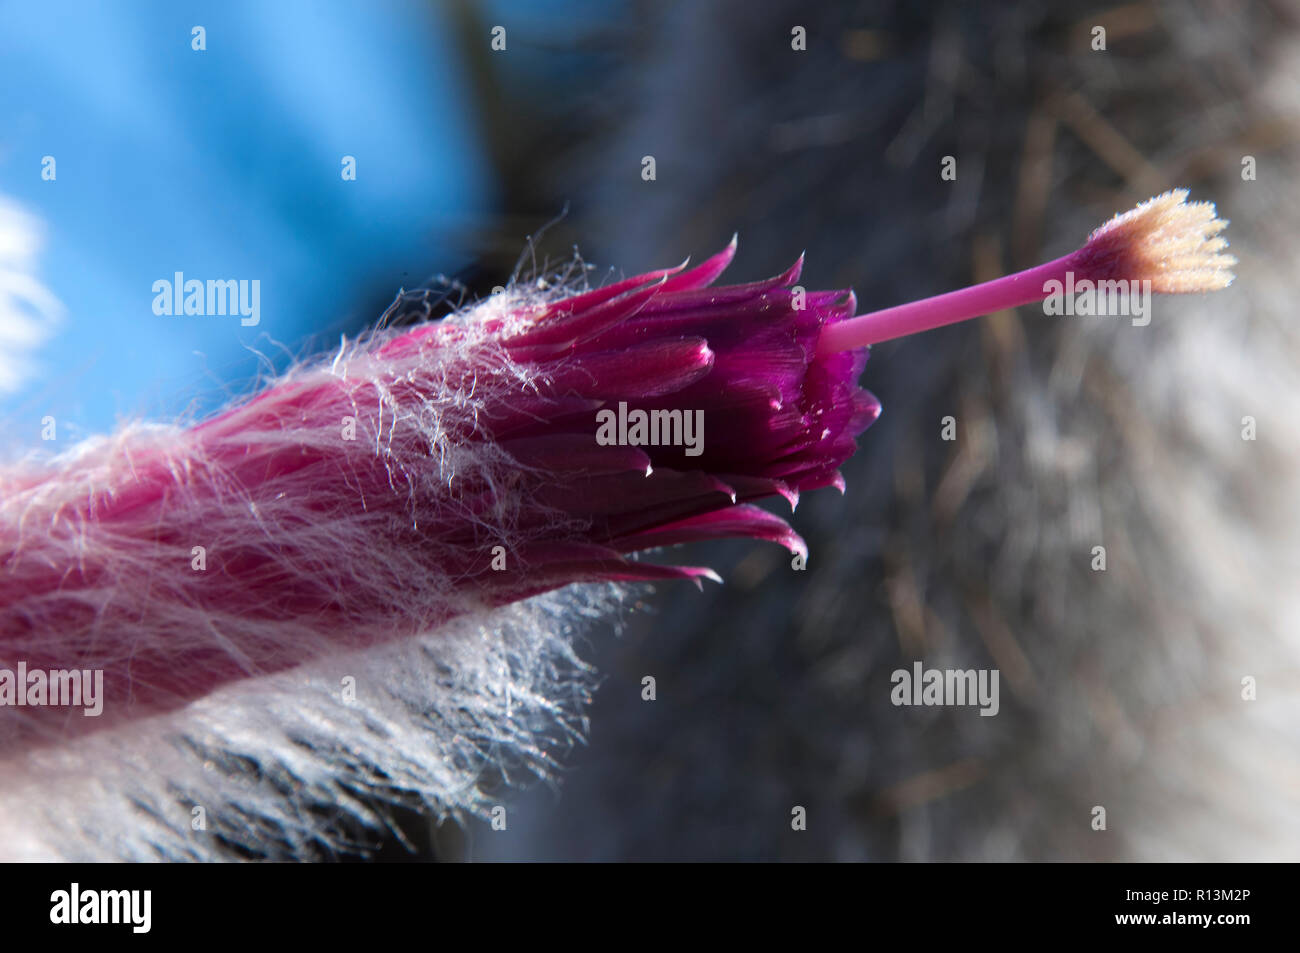 Sydney Australia, close-up of magenta coloured flower of silver torch cactus Stock Photo